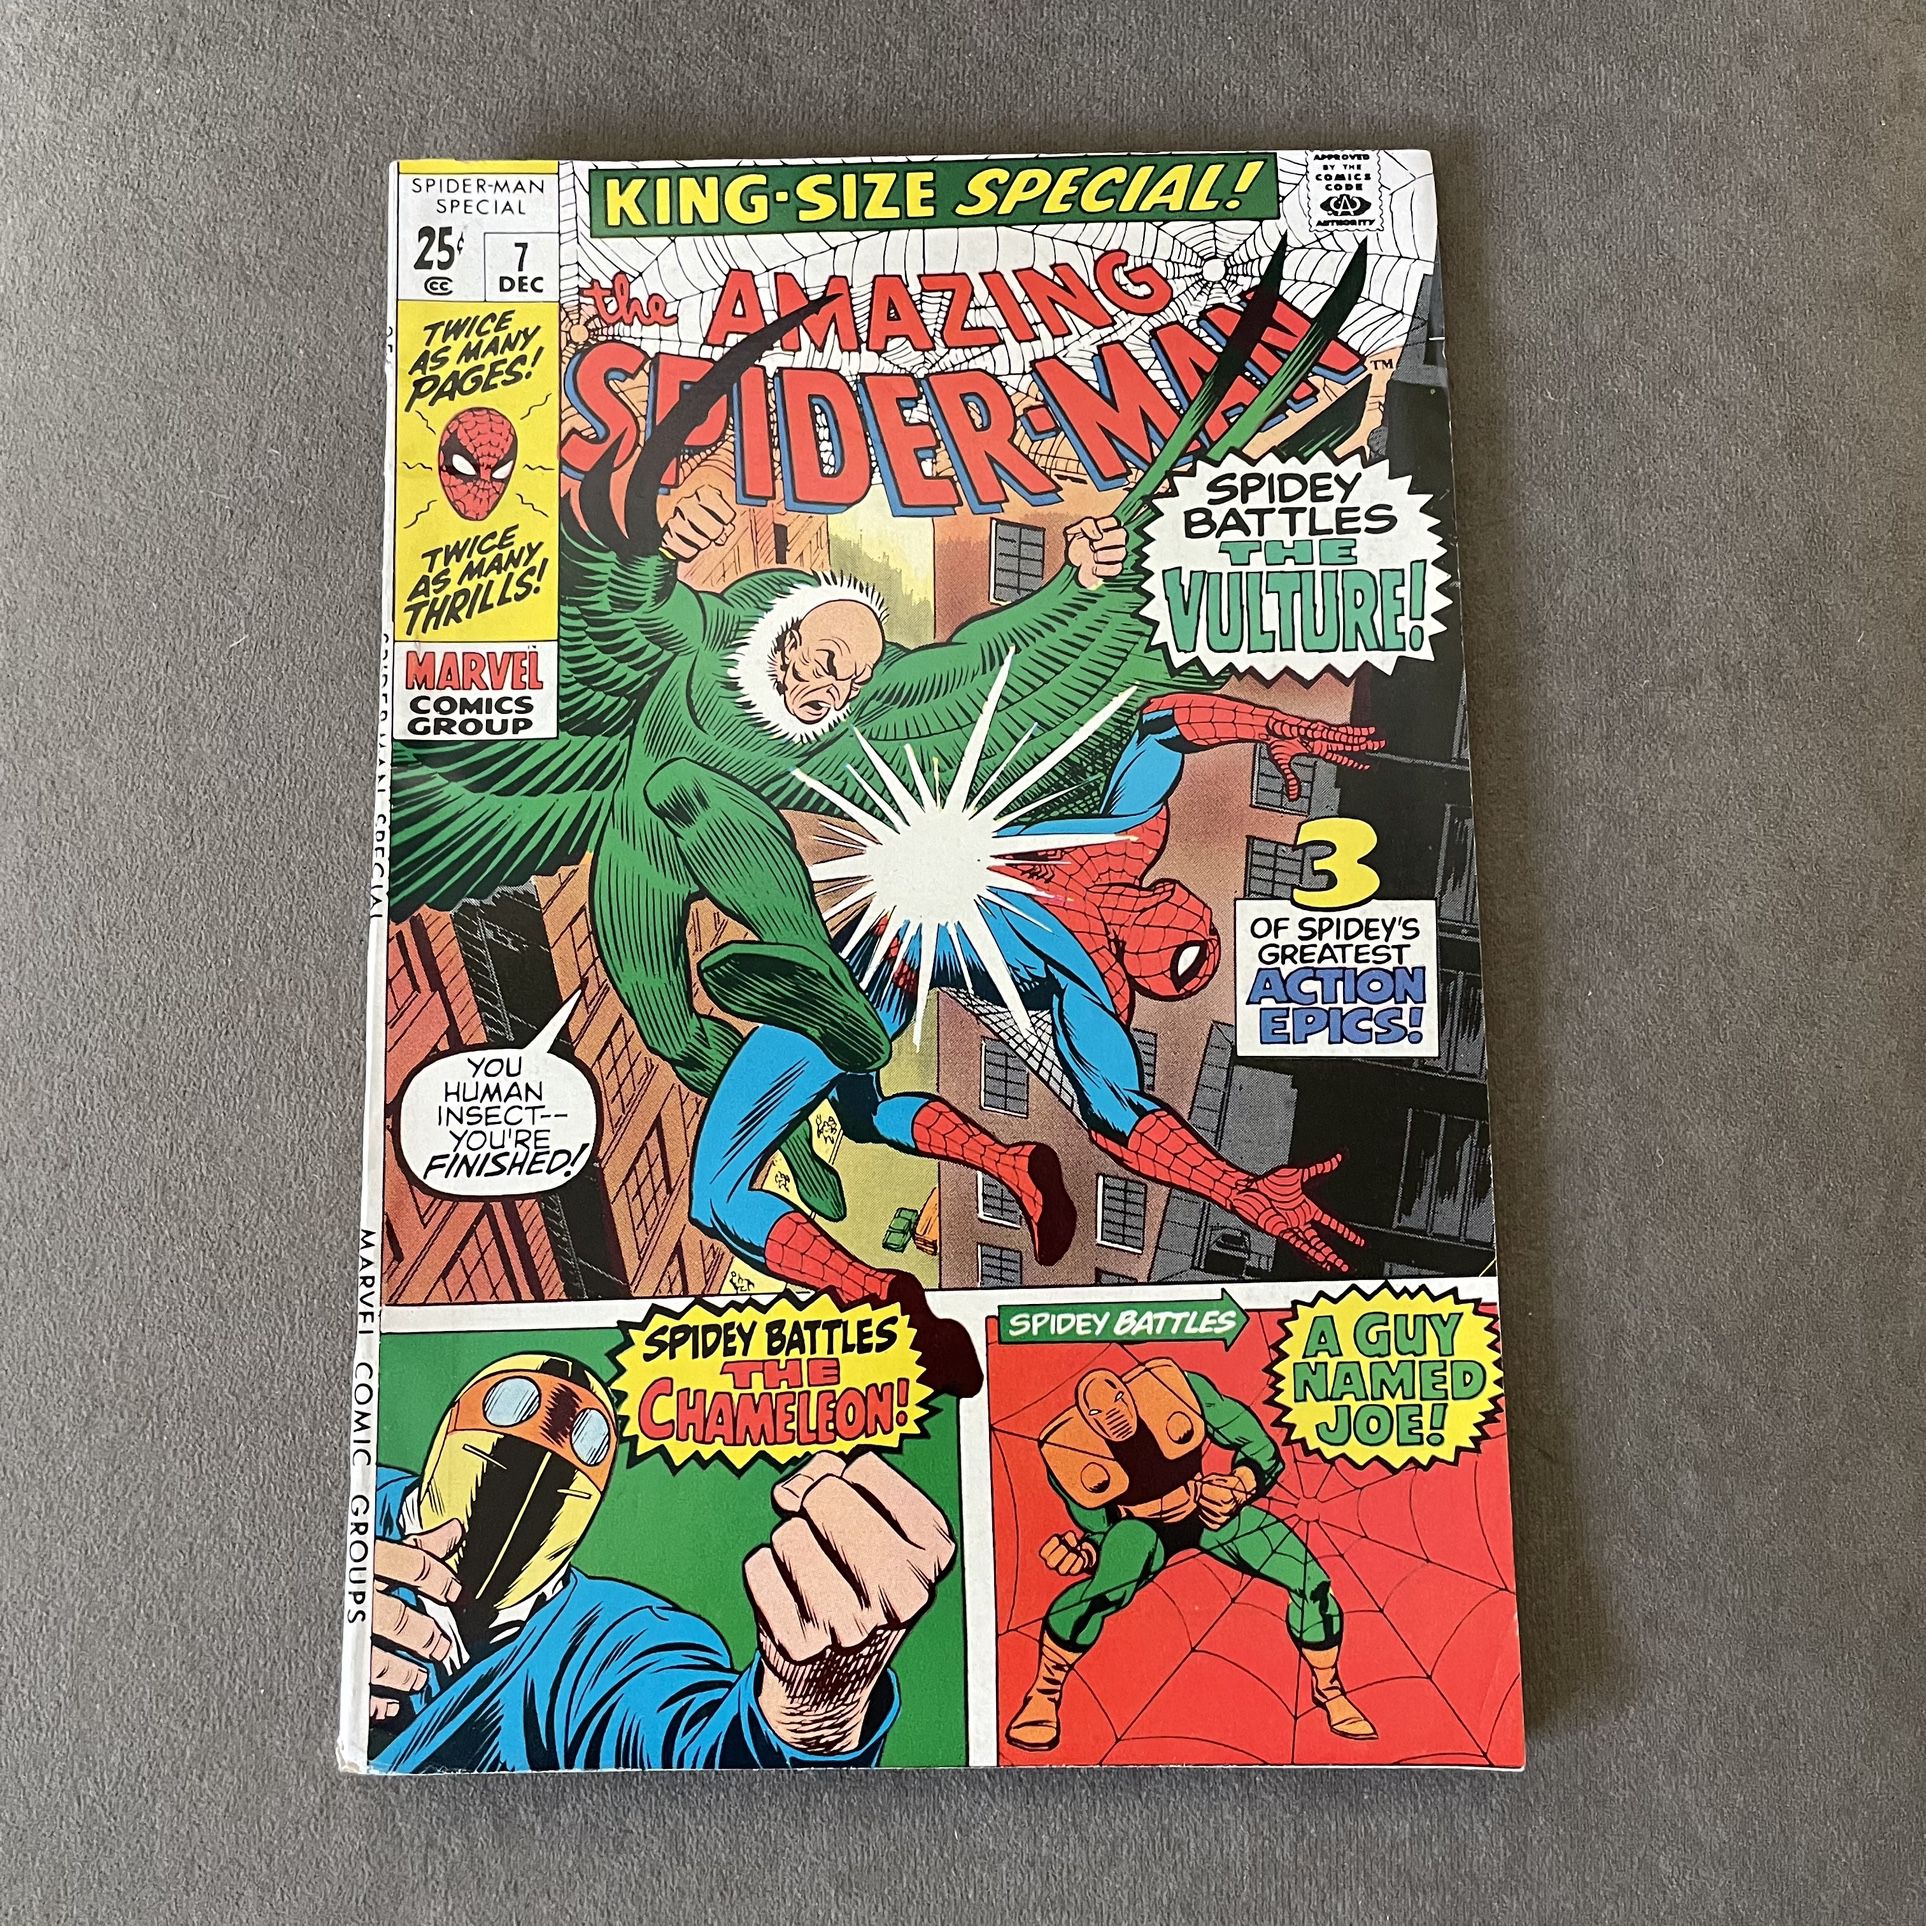 King Size Special The Amazing Spider-Man #7